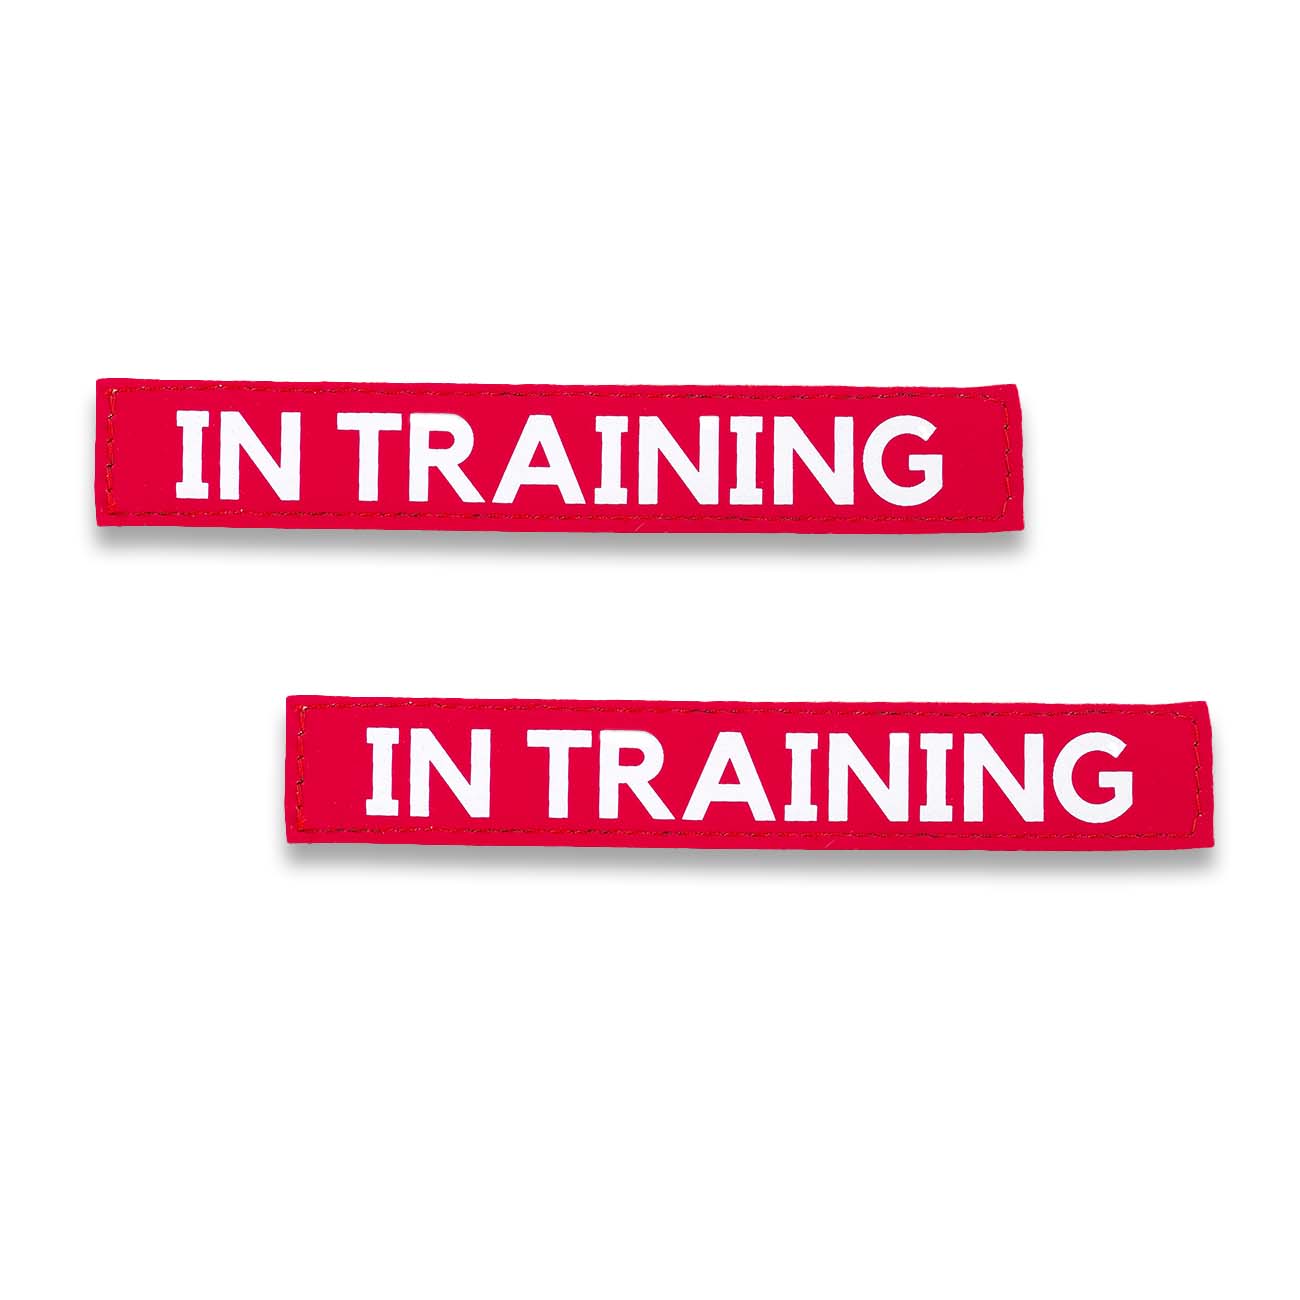 "IN TRAINING" Text Patch (2 pcs)